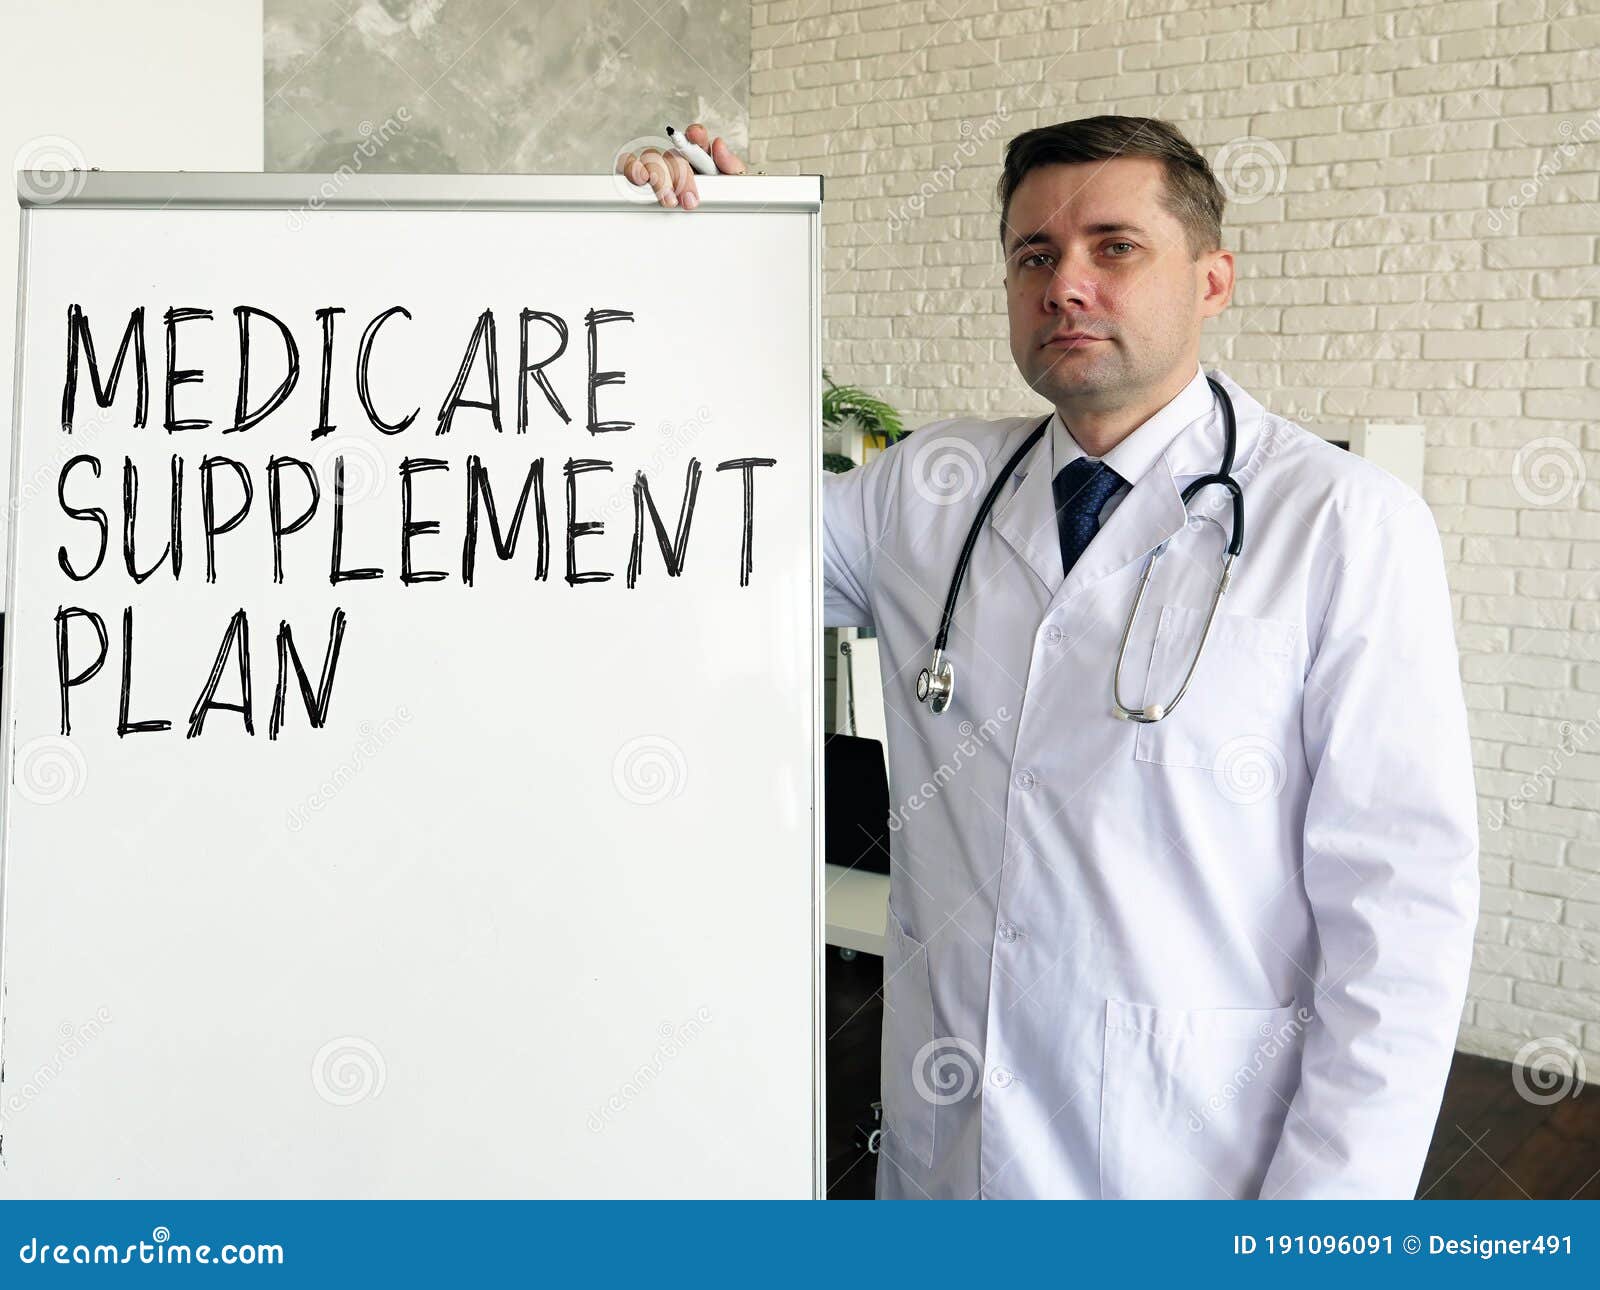 the doctor talks about medicare supplement plan.